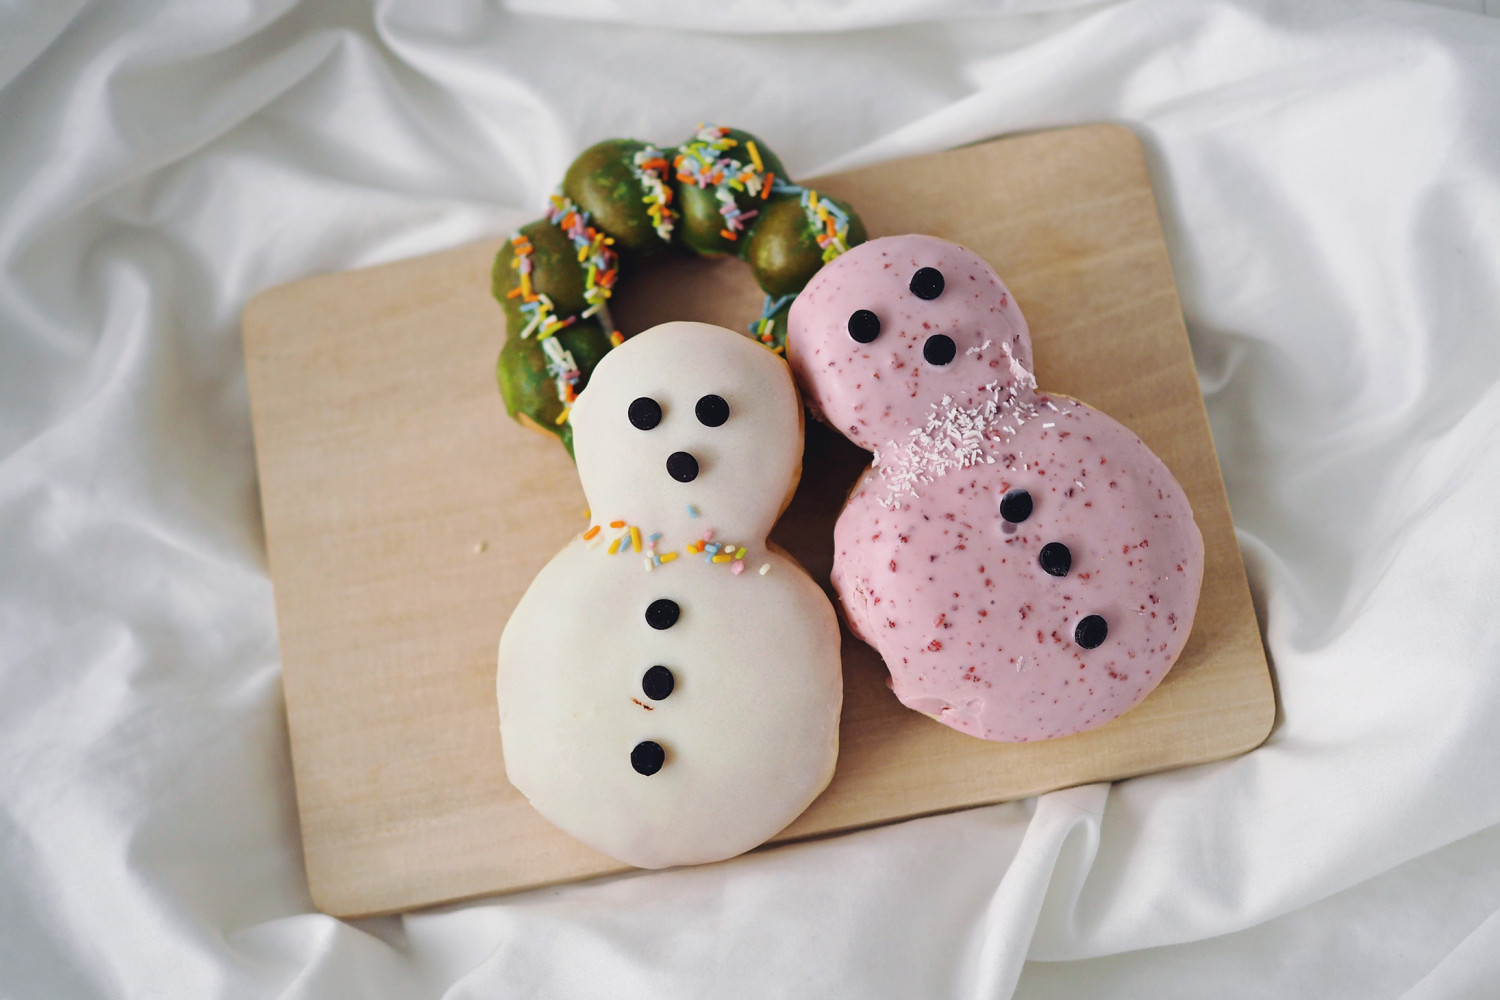 Festive Spirit and Full Stomachs: Christmas-themed Sweets in Tokyo for This Year’s Holiday Season